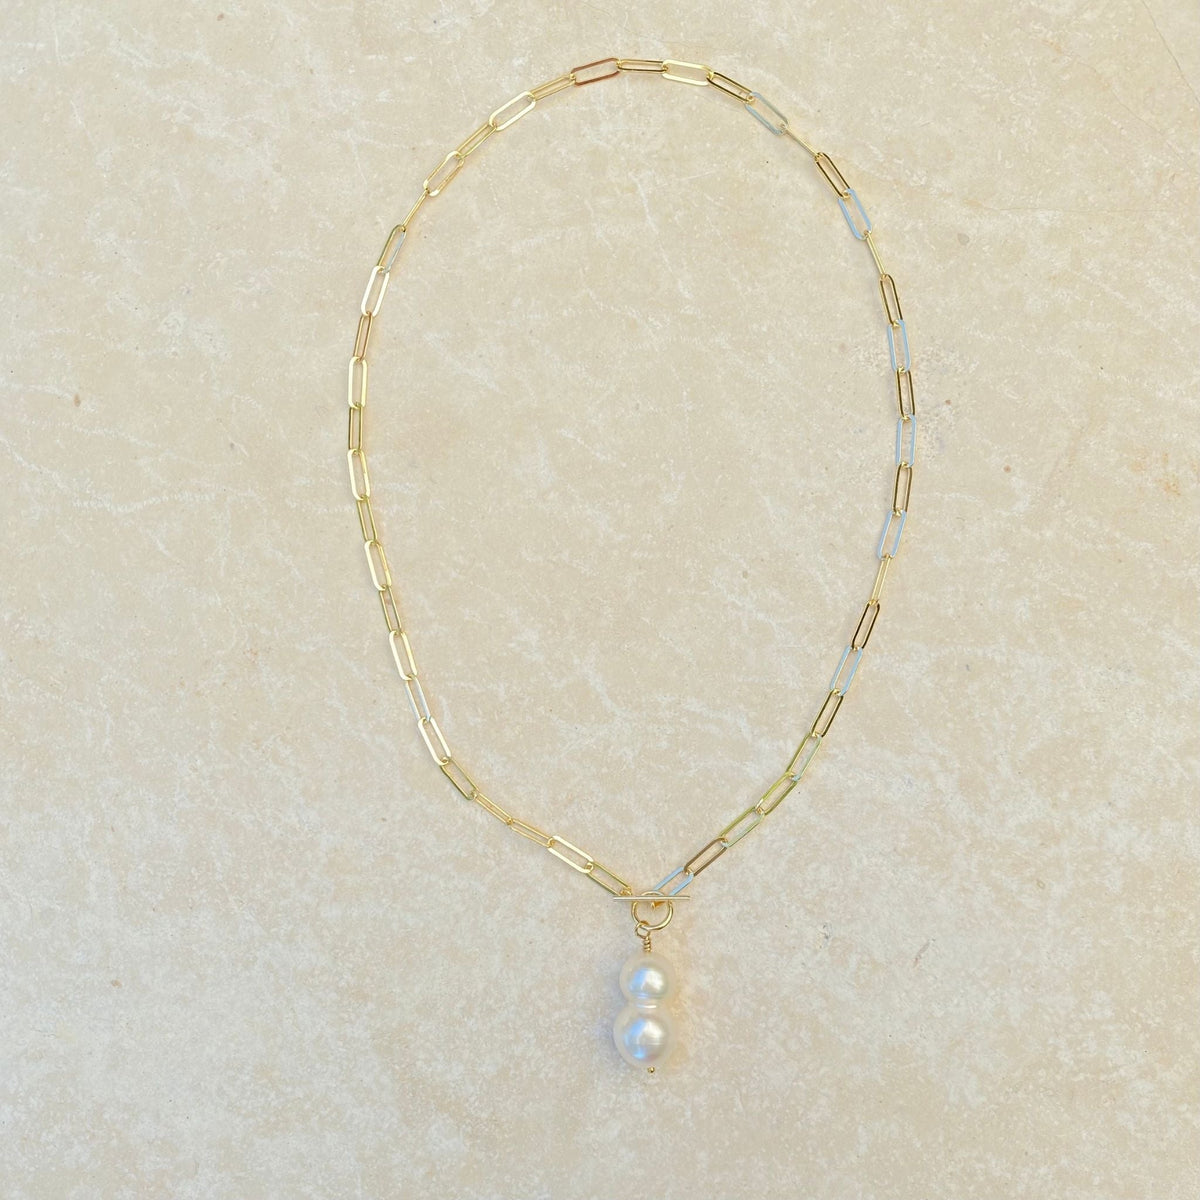 Celebrate your Curves - Double Freshwater Pearl Chain Necklace